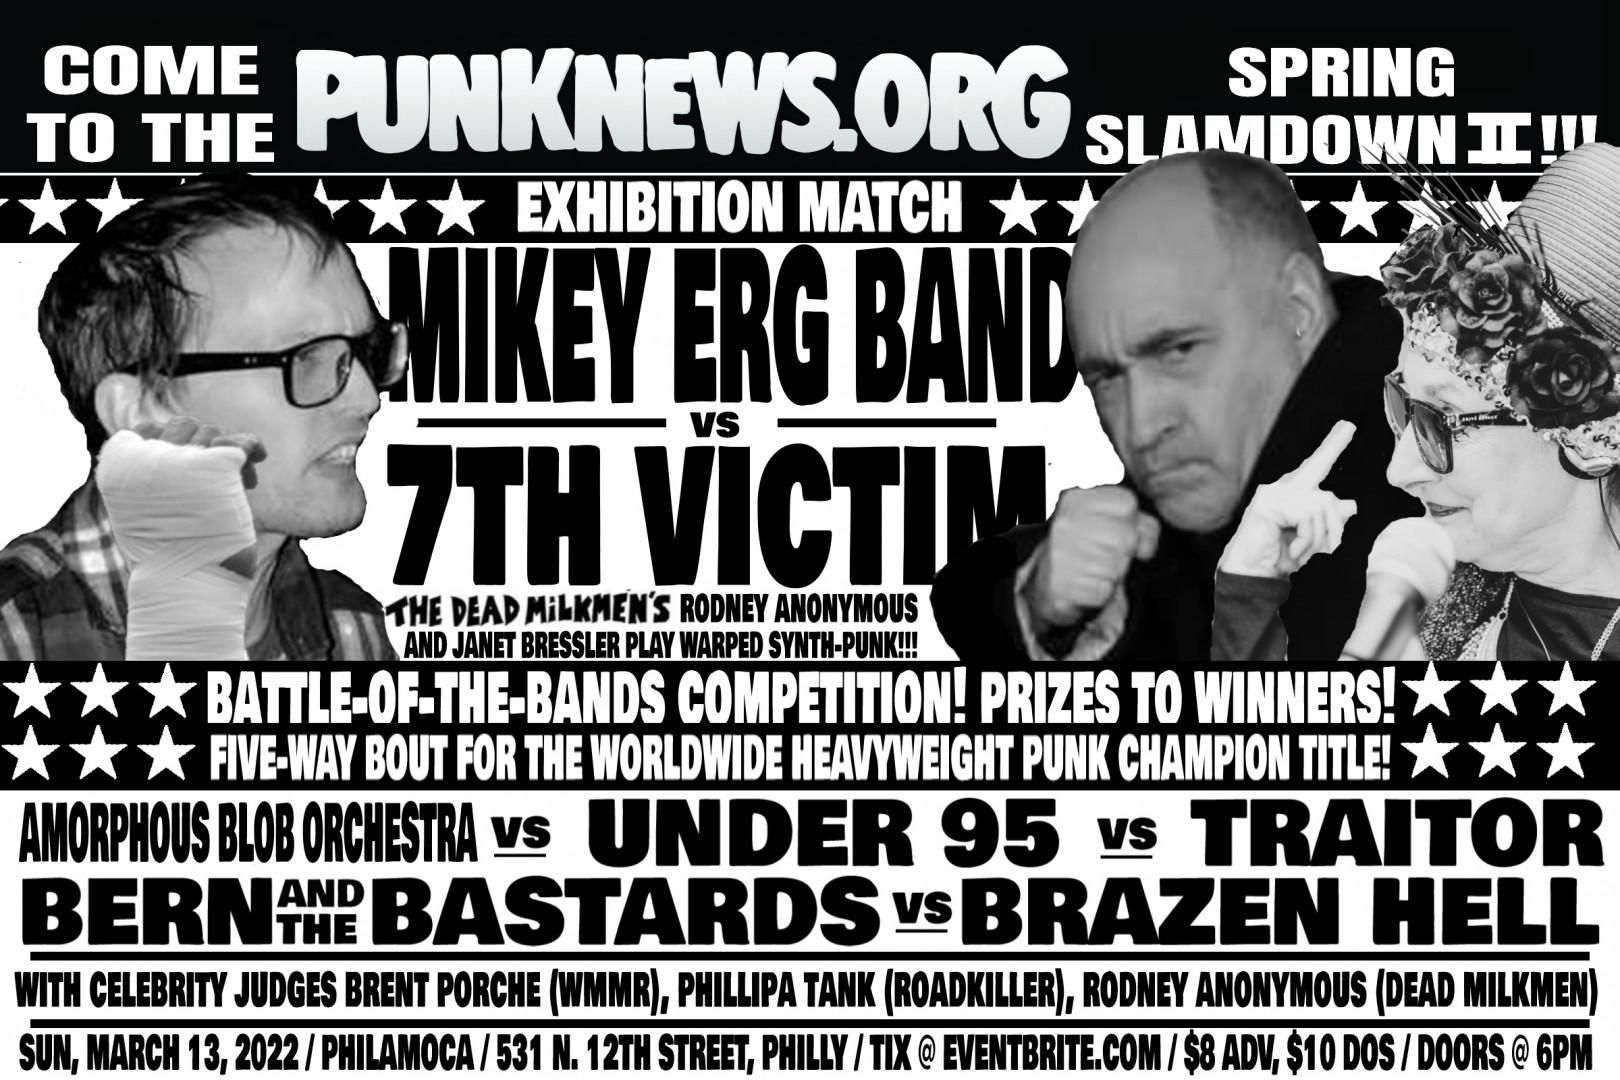 Mikey Erg Band and Rodney Anonymous' 7th Victim to rumble Sunday in Philly at Spring Slamdown 2!